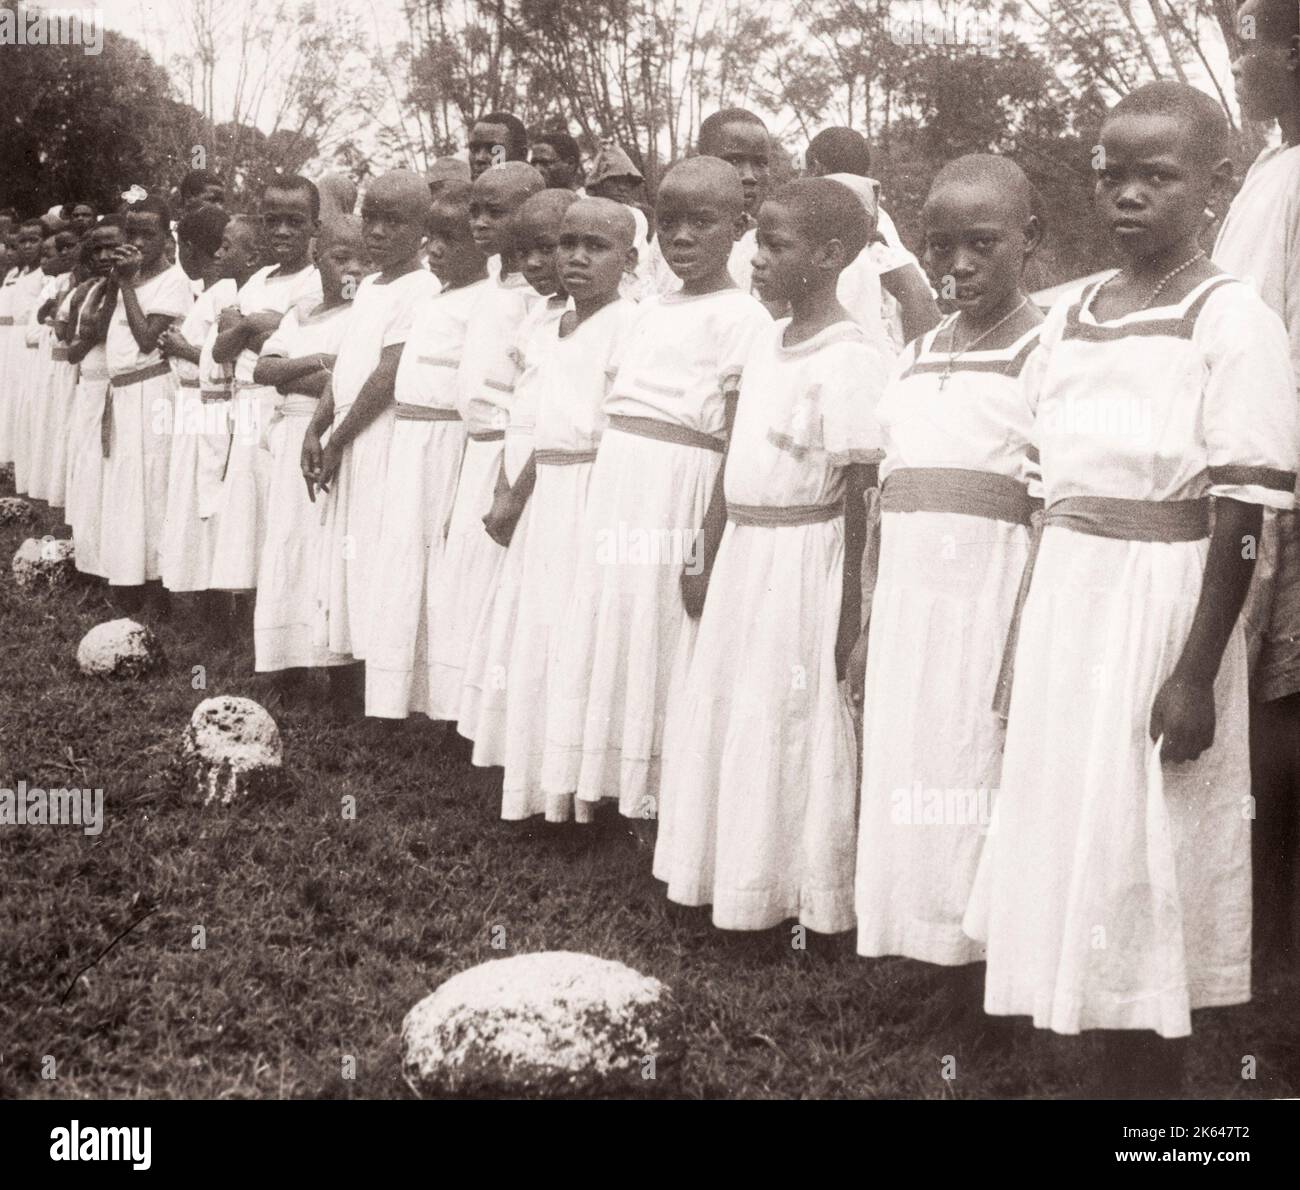 1940s East Africa - Uganda -Mmbarara - - girls of a Christian mission school Photograph by a British army recruitment officer stationed in East Africa and the Middle East during World War II Stock Photo